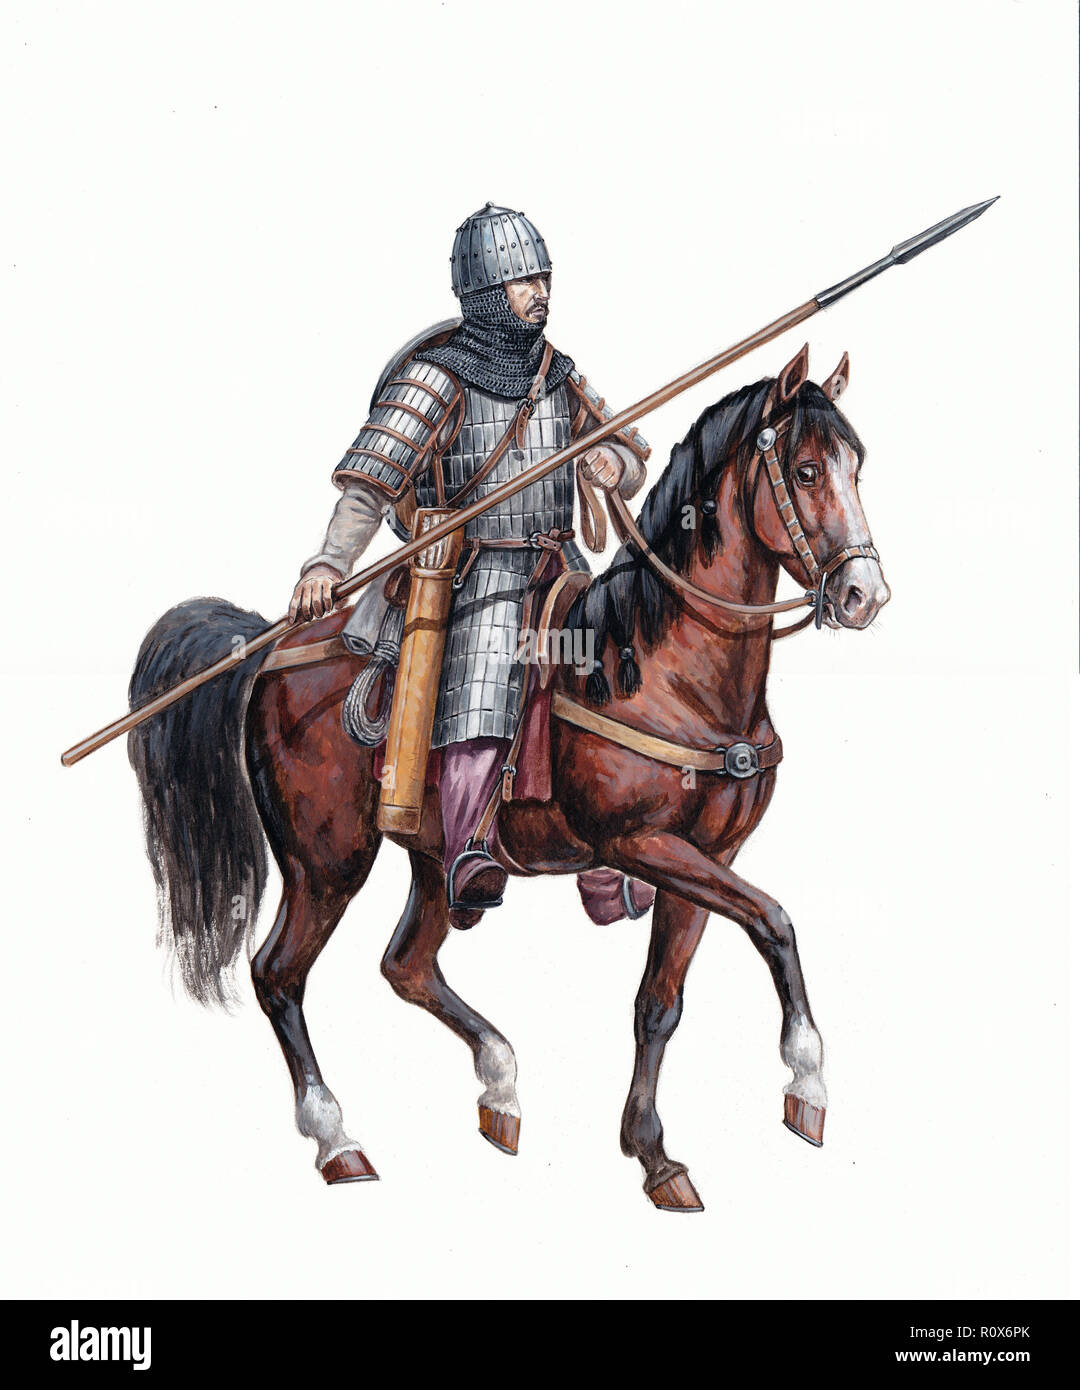 Heavy armored magyar horsback. Medieval mounted knight illustration. Stock Photo